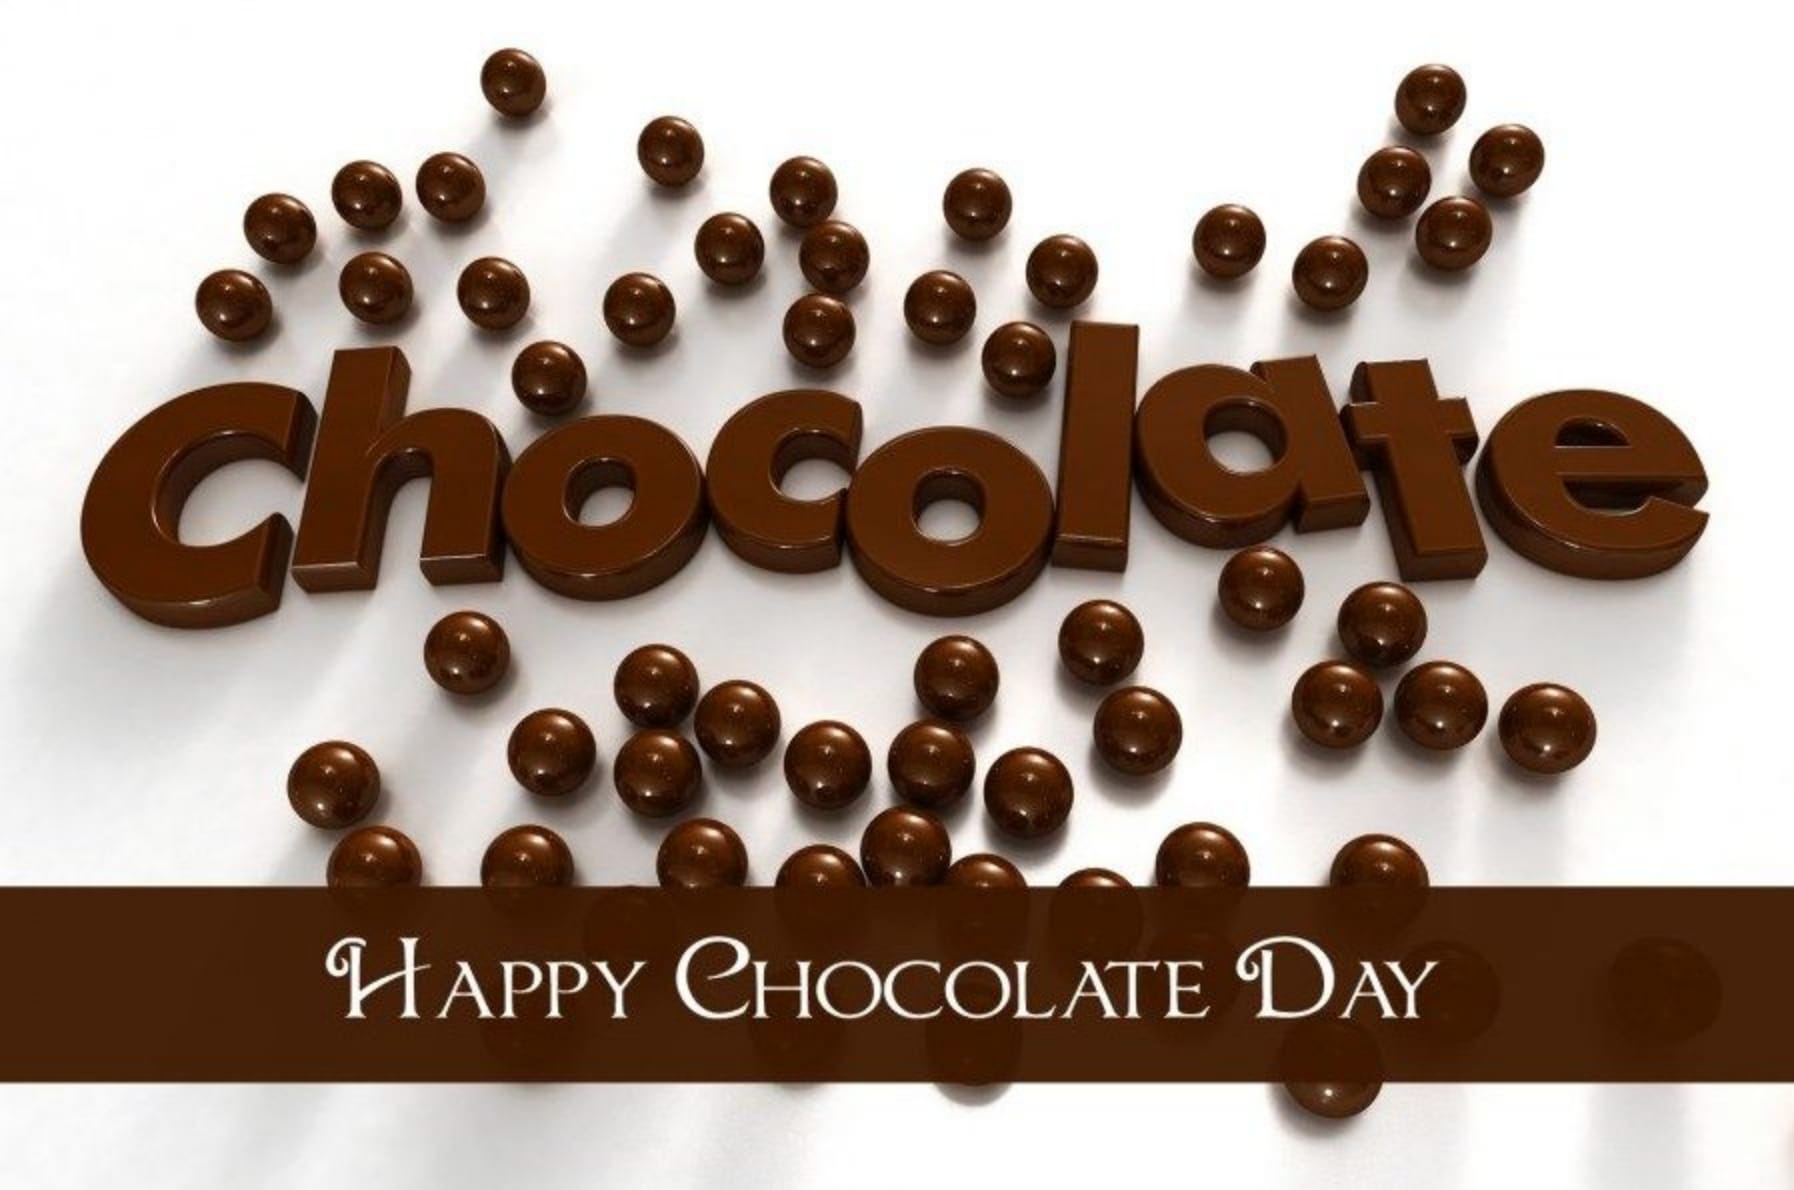 chocolate day images 2022 download